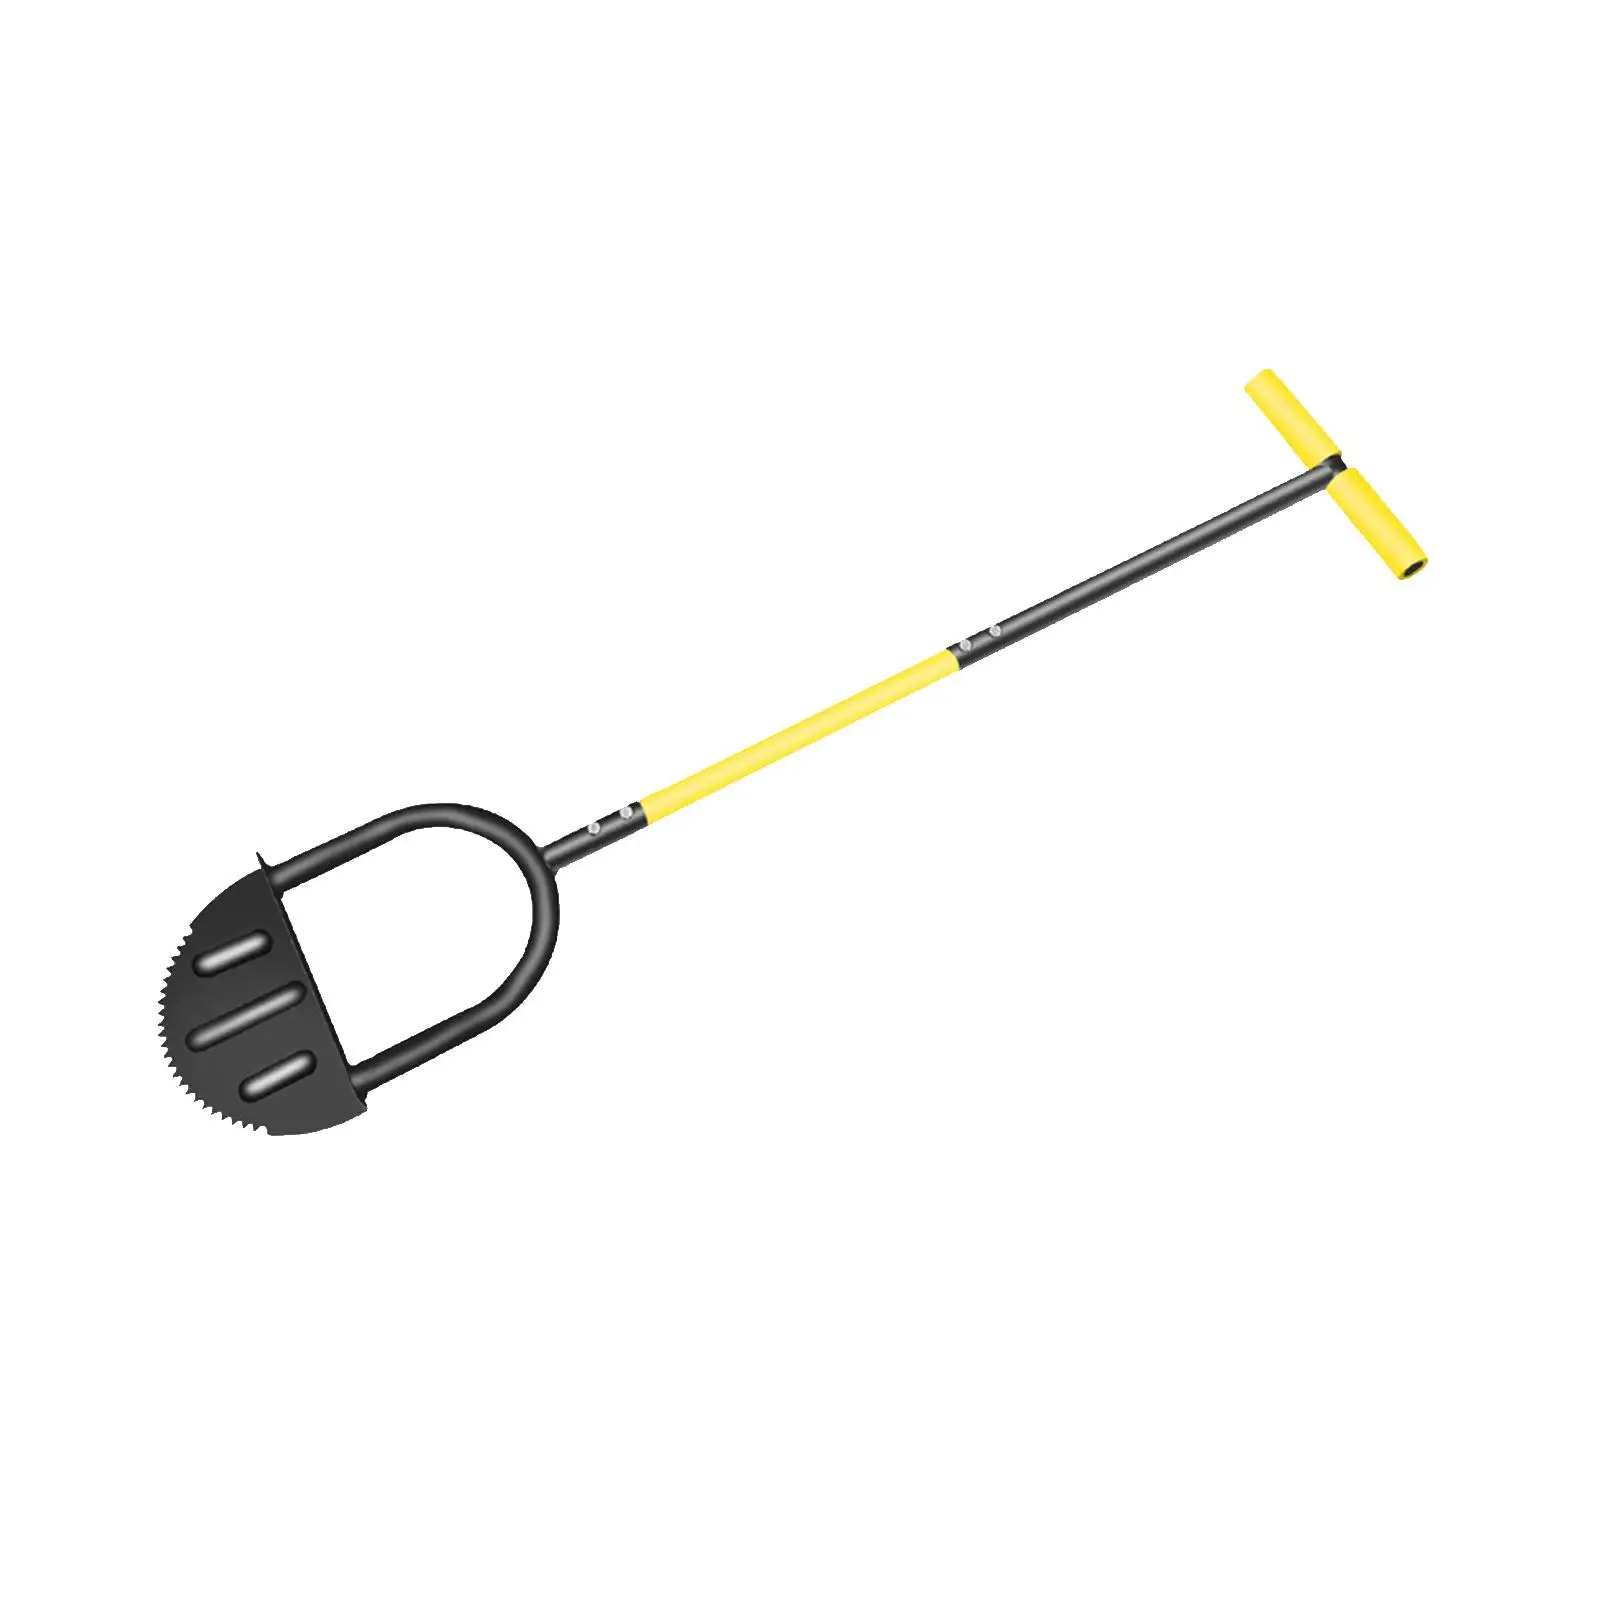 Manual Edger with Steel Long Handle Saw Tooth Garden Edger Accessory for Flower Beds Sidewalk Grass Landscaping Garden Driveway